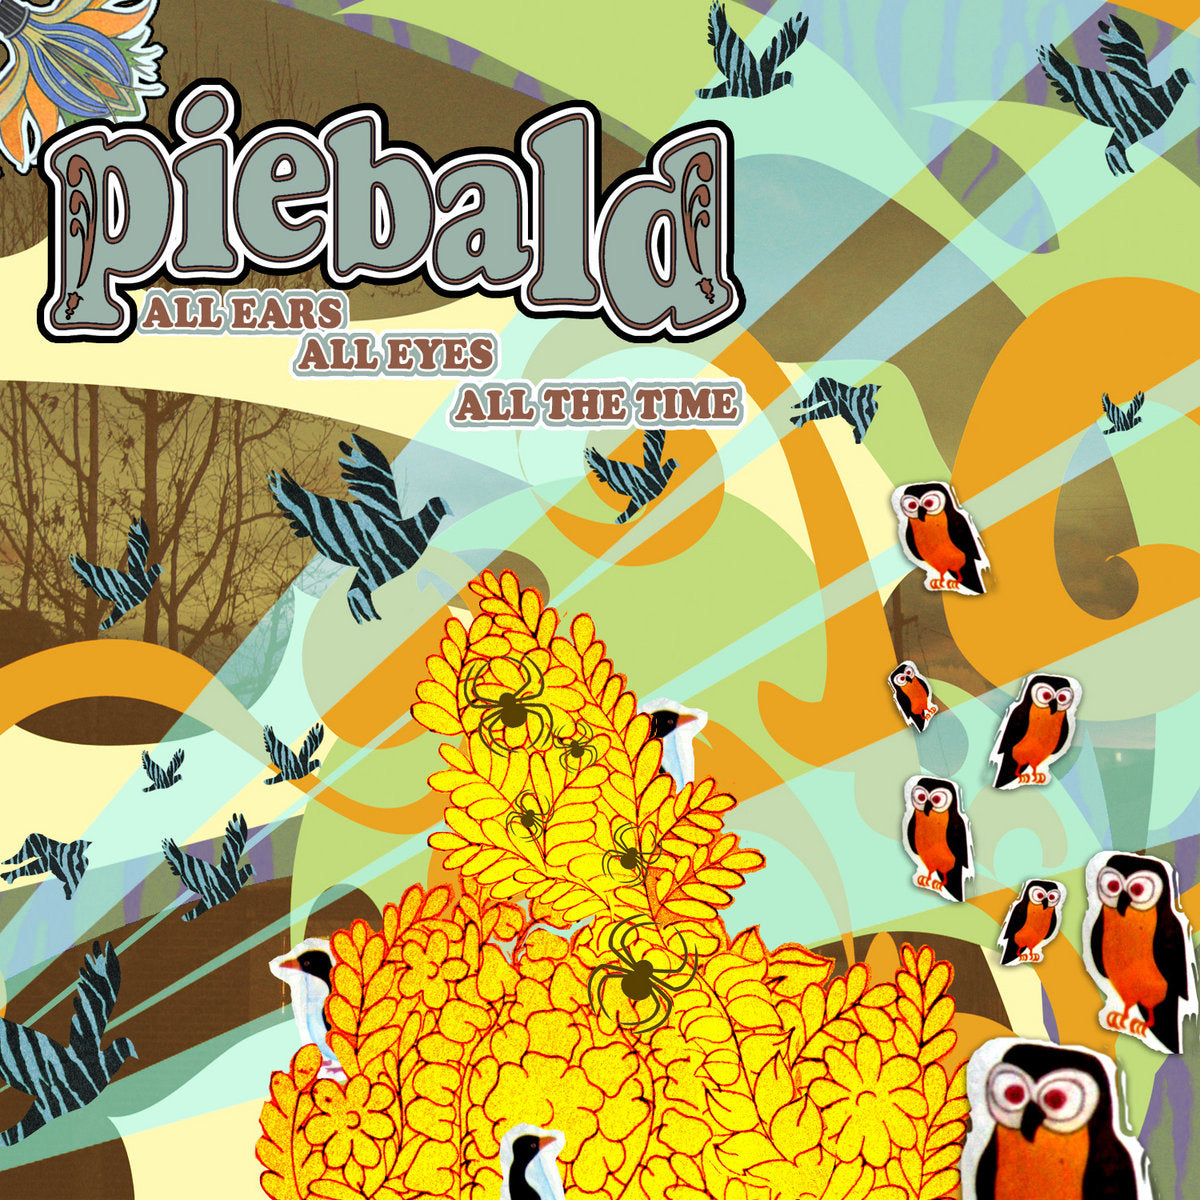 Piebald "All Ears All Eyes All The Time" CD